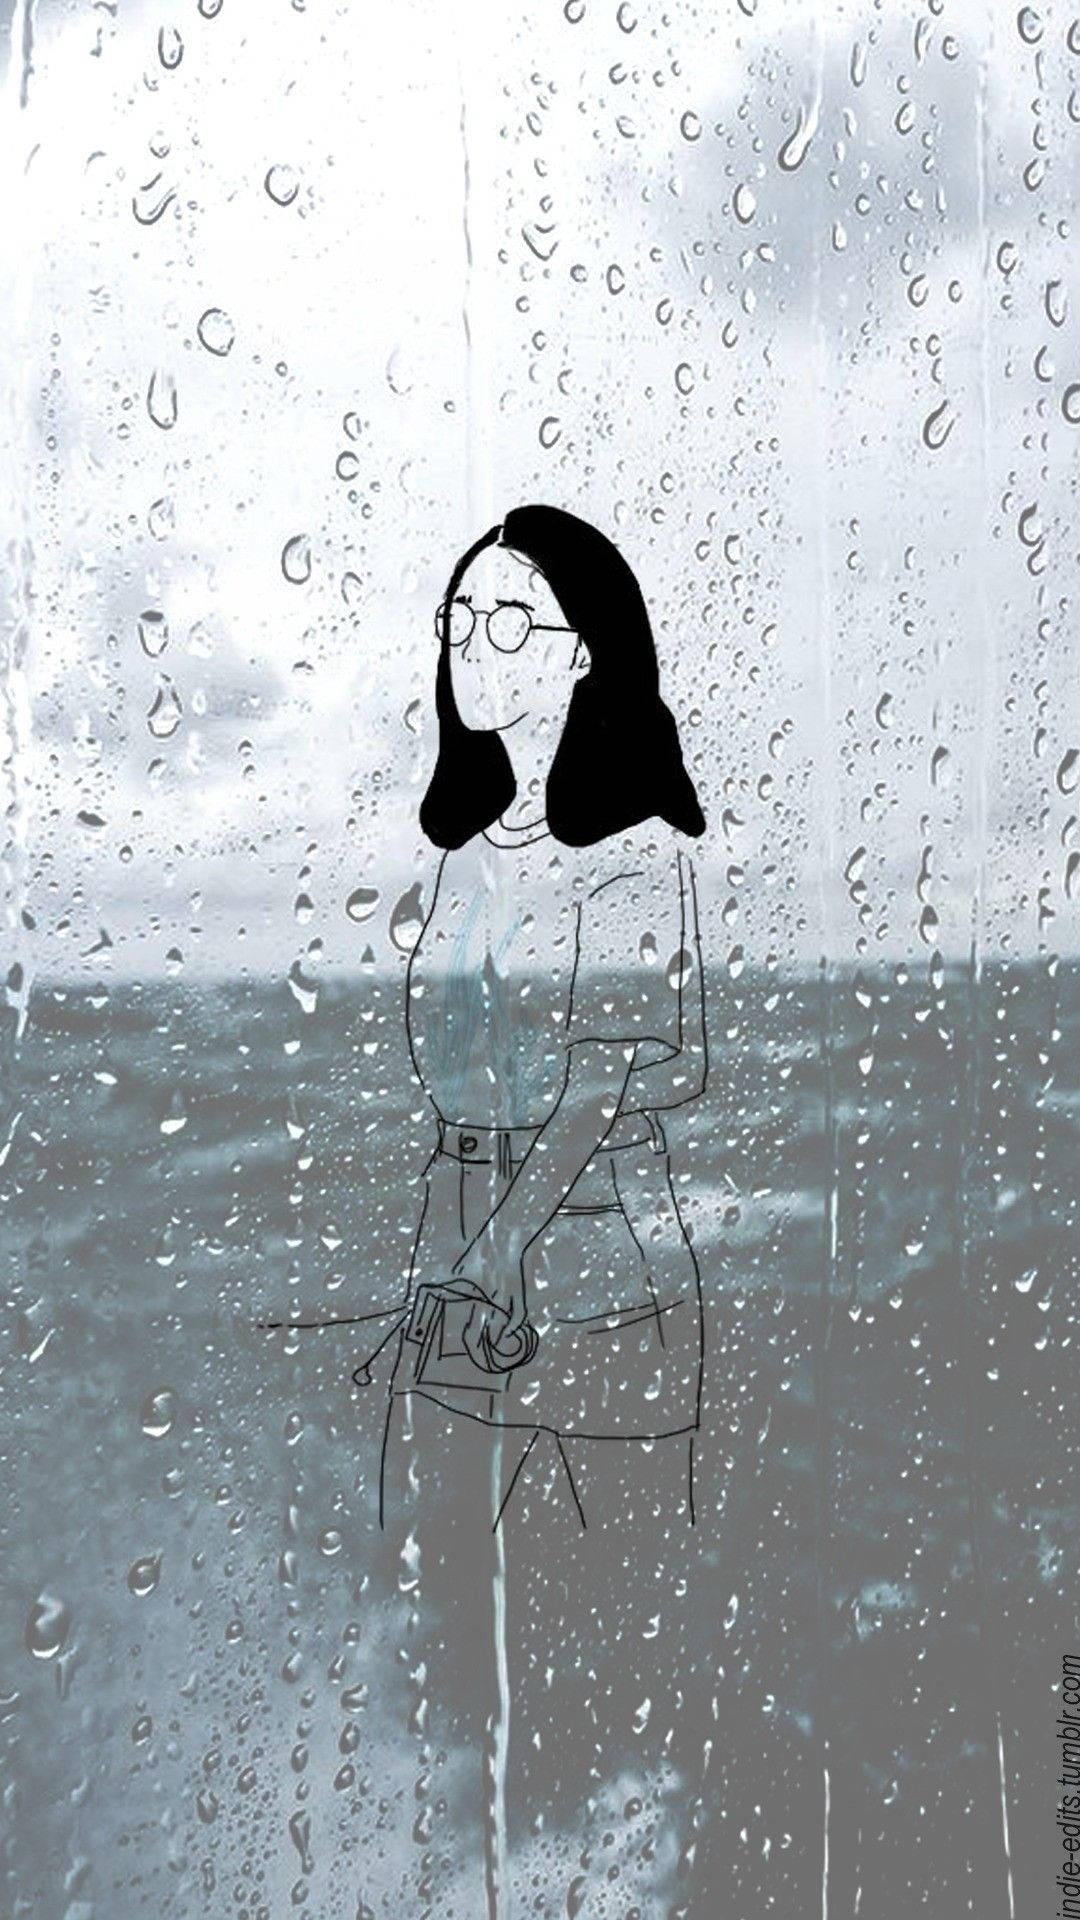 Outline Of A Woman With Glasses Indie Phone Background